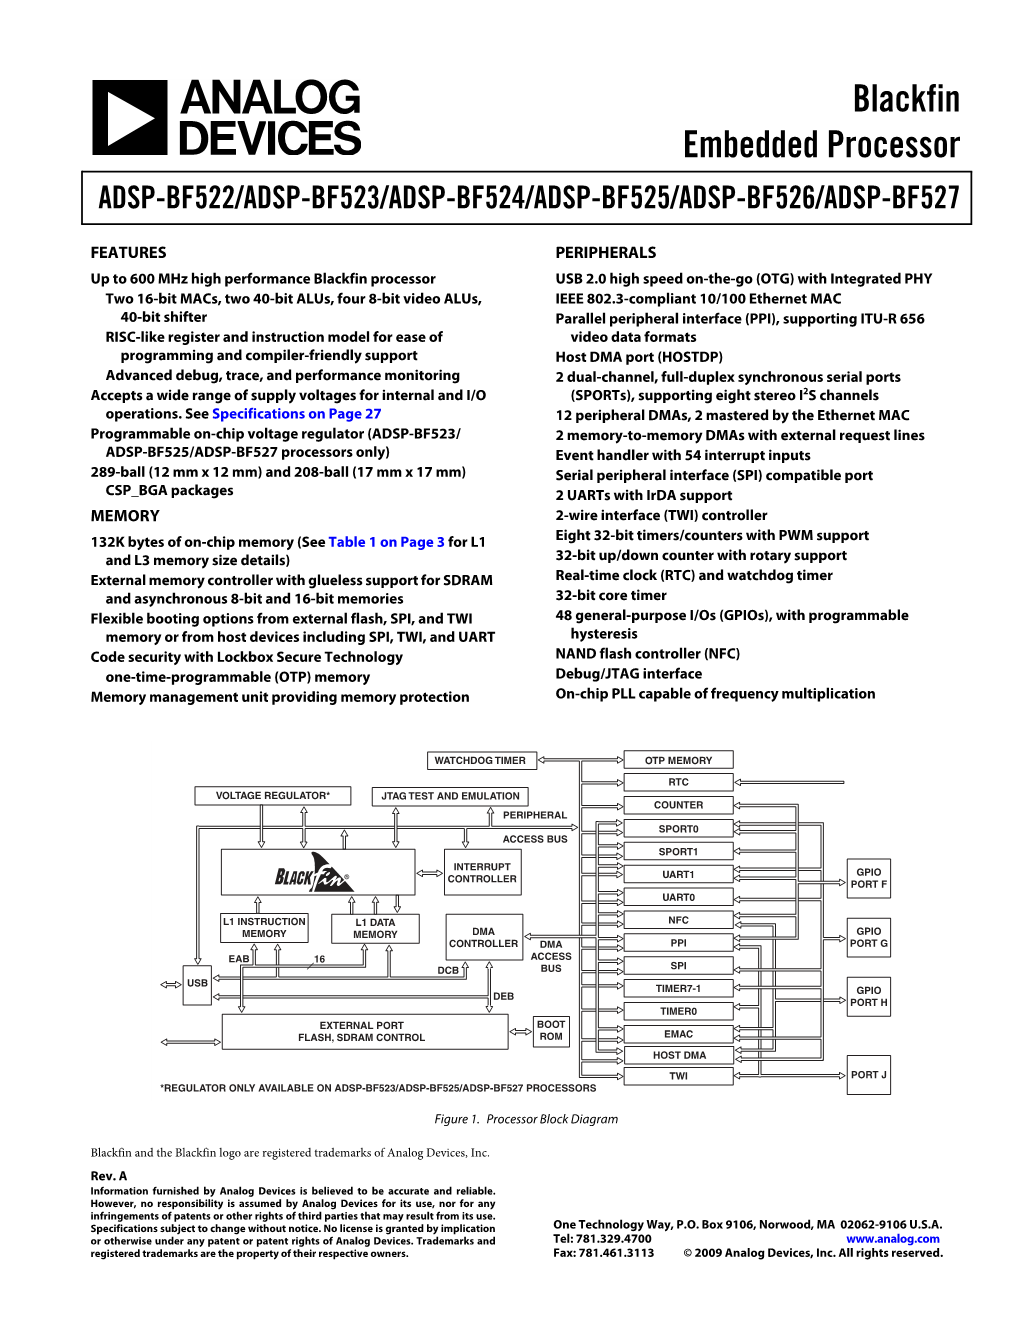 ADSP-Bf52x Blackfin Embedded Processor Data Sheet, Revision A